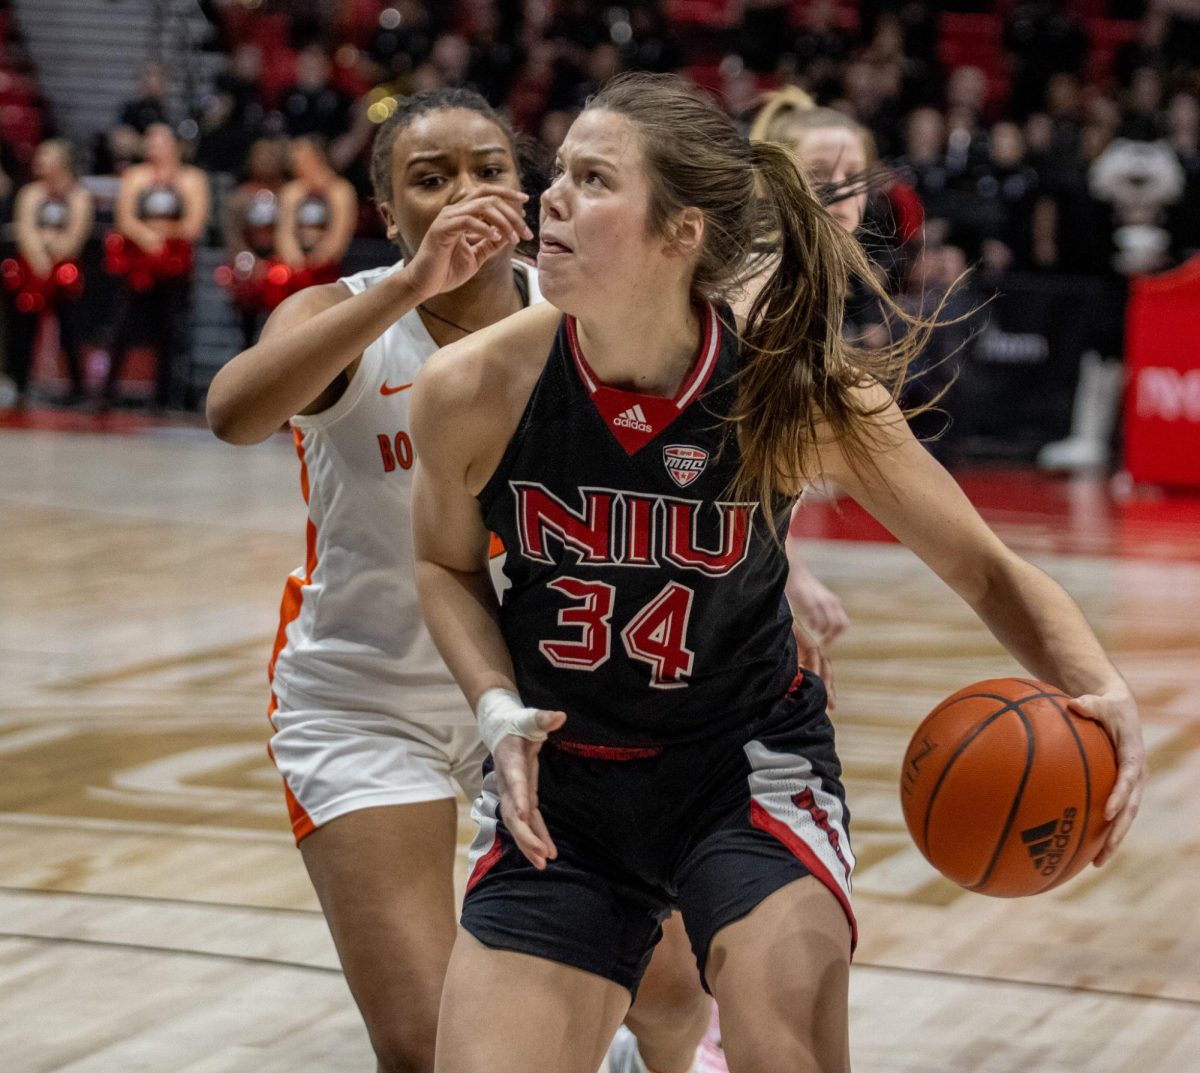 Senior forward Brooke Stonebraker (34) looks to put up a shot past Bowling Green defenders. Stonebraker had 13 points and nine rebounds as the Huskies lost to Bowling Green Saturday 82-73. (Tim Dodge | Northern Star)